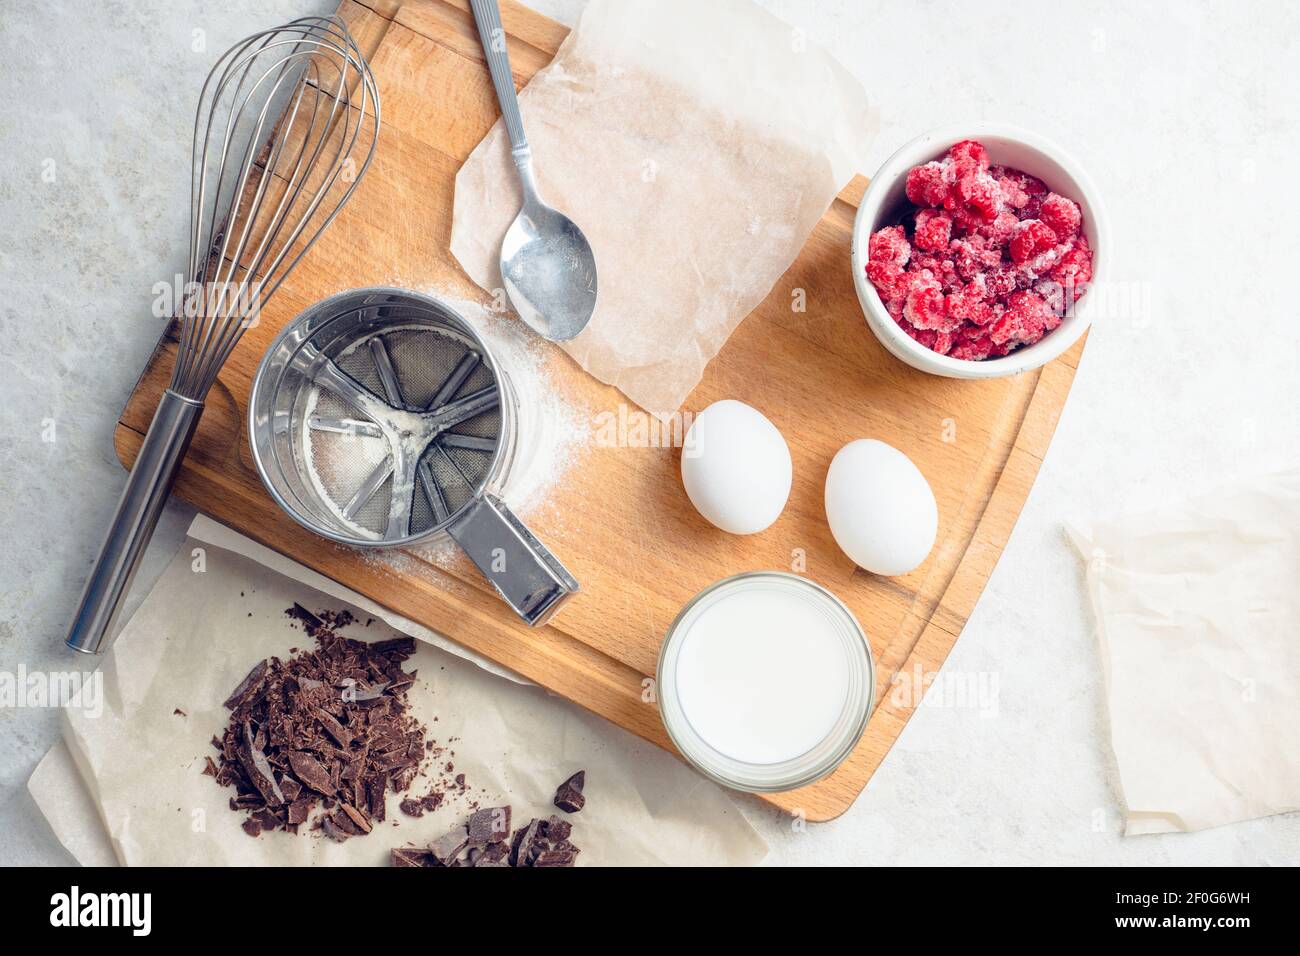 Ingredients for baking muffins on the kitchen table. Selective focus. Stock Photo